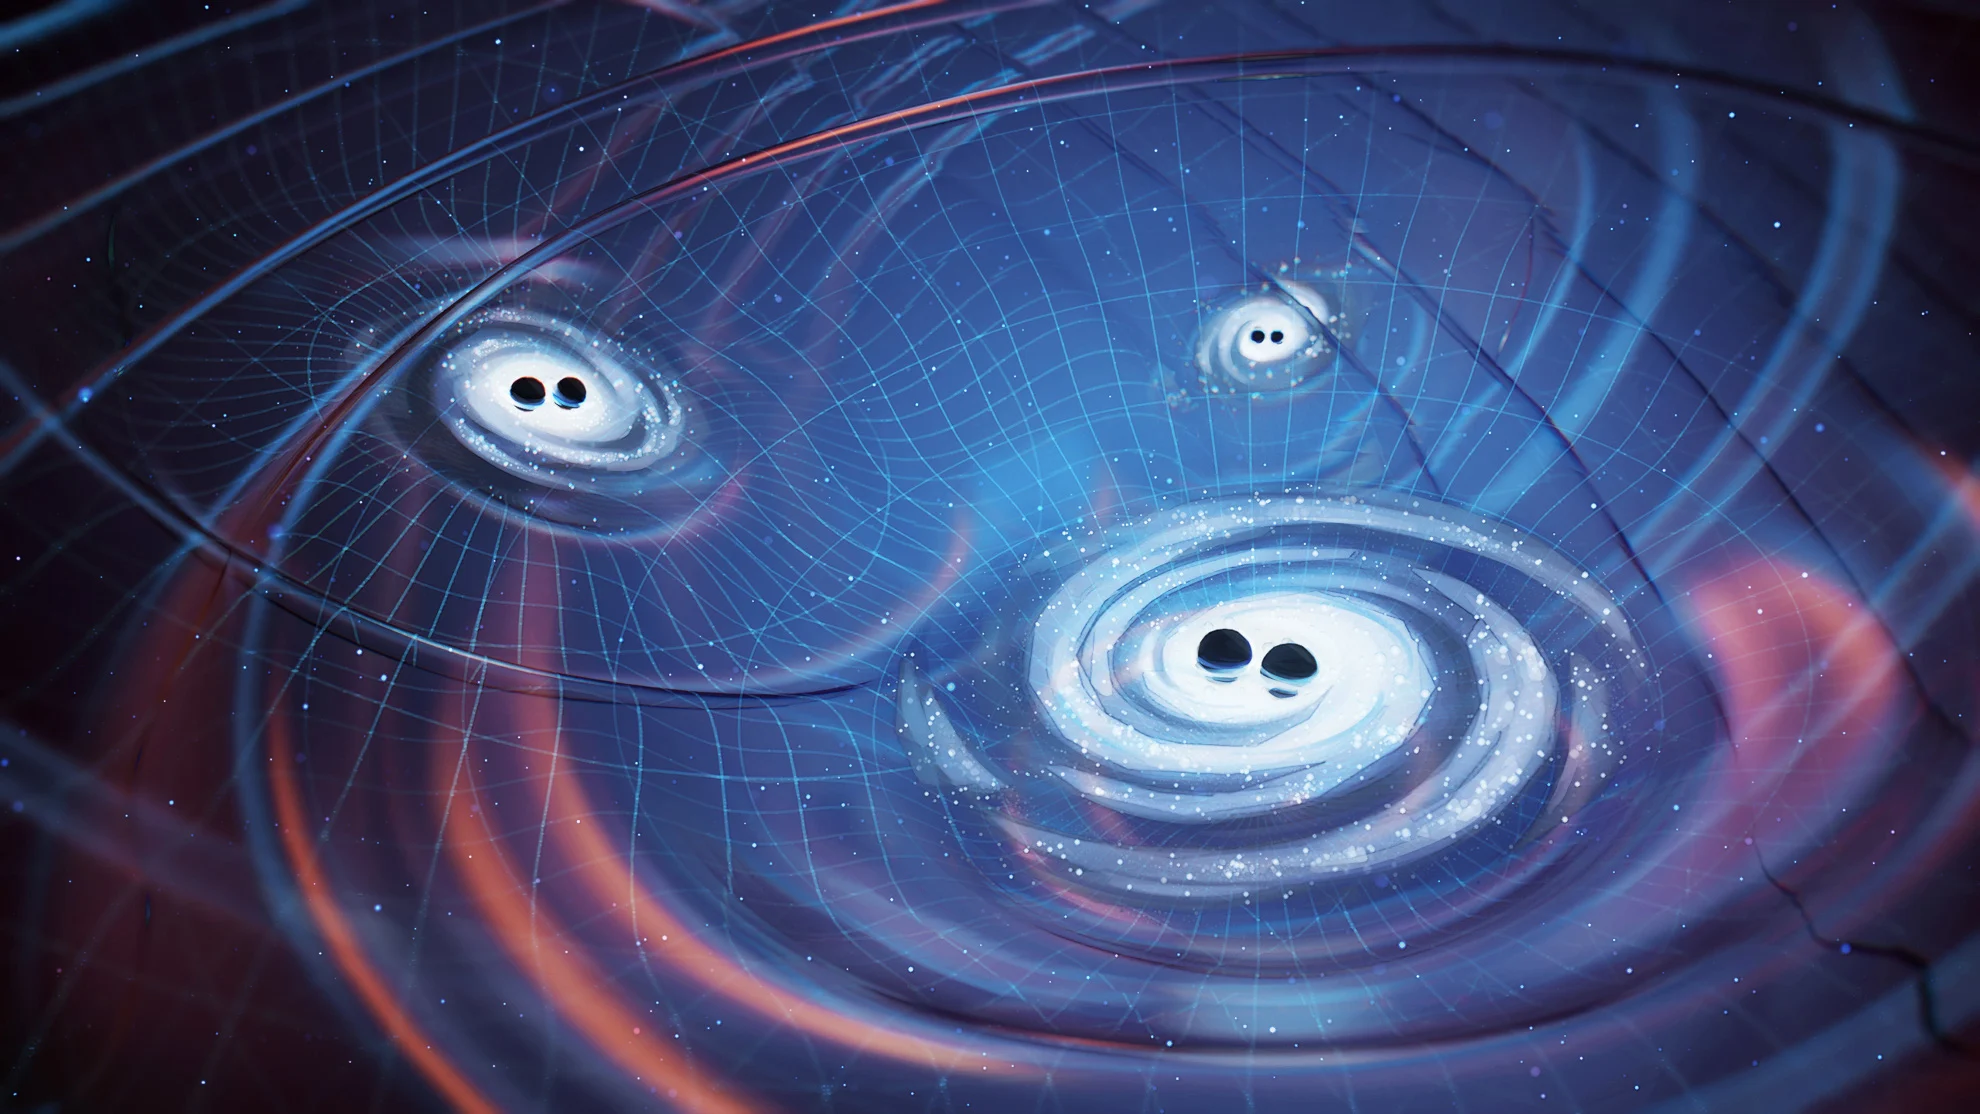 Dead stars reveal the universe's background 'hum' of gravitational waves